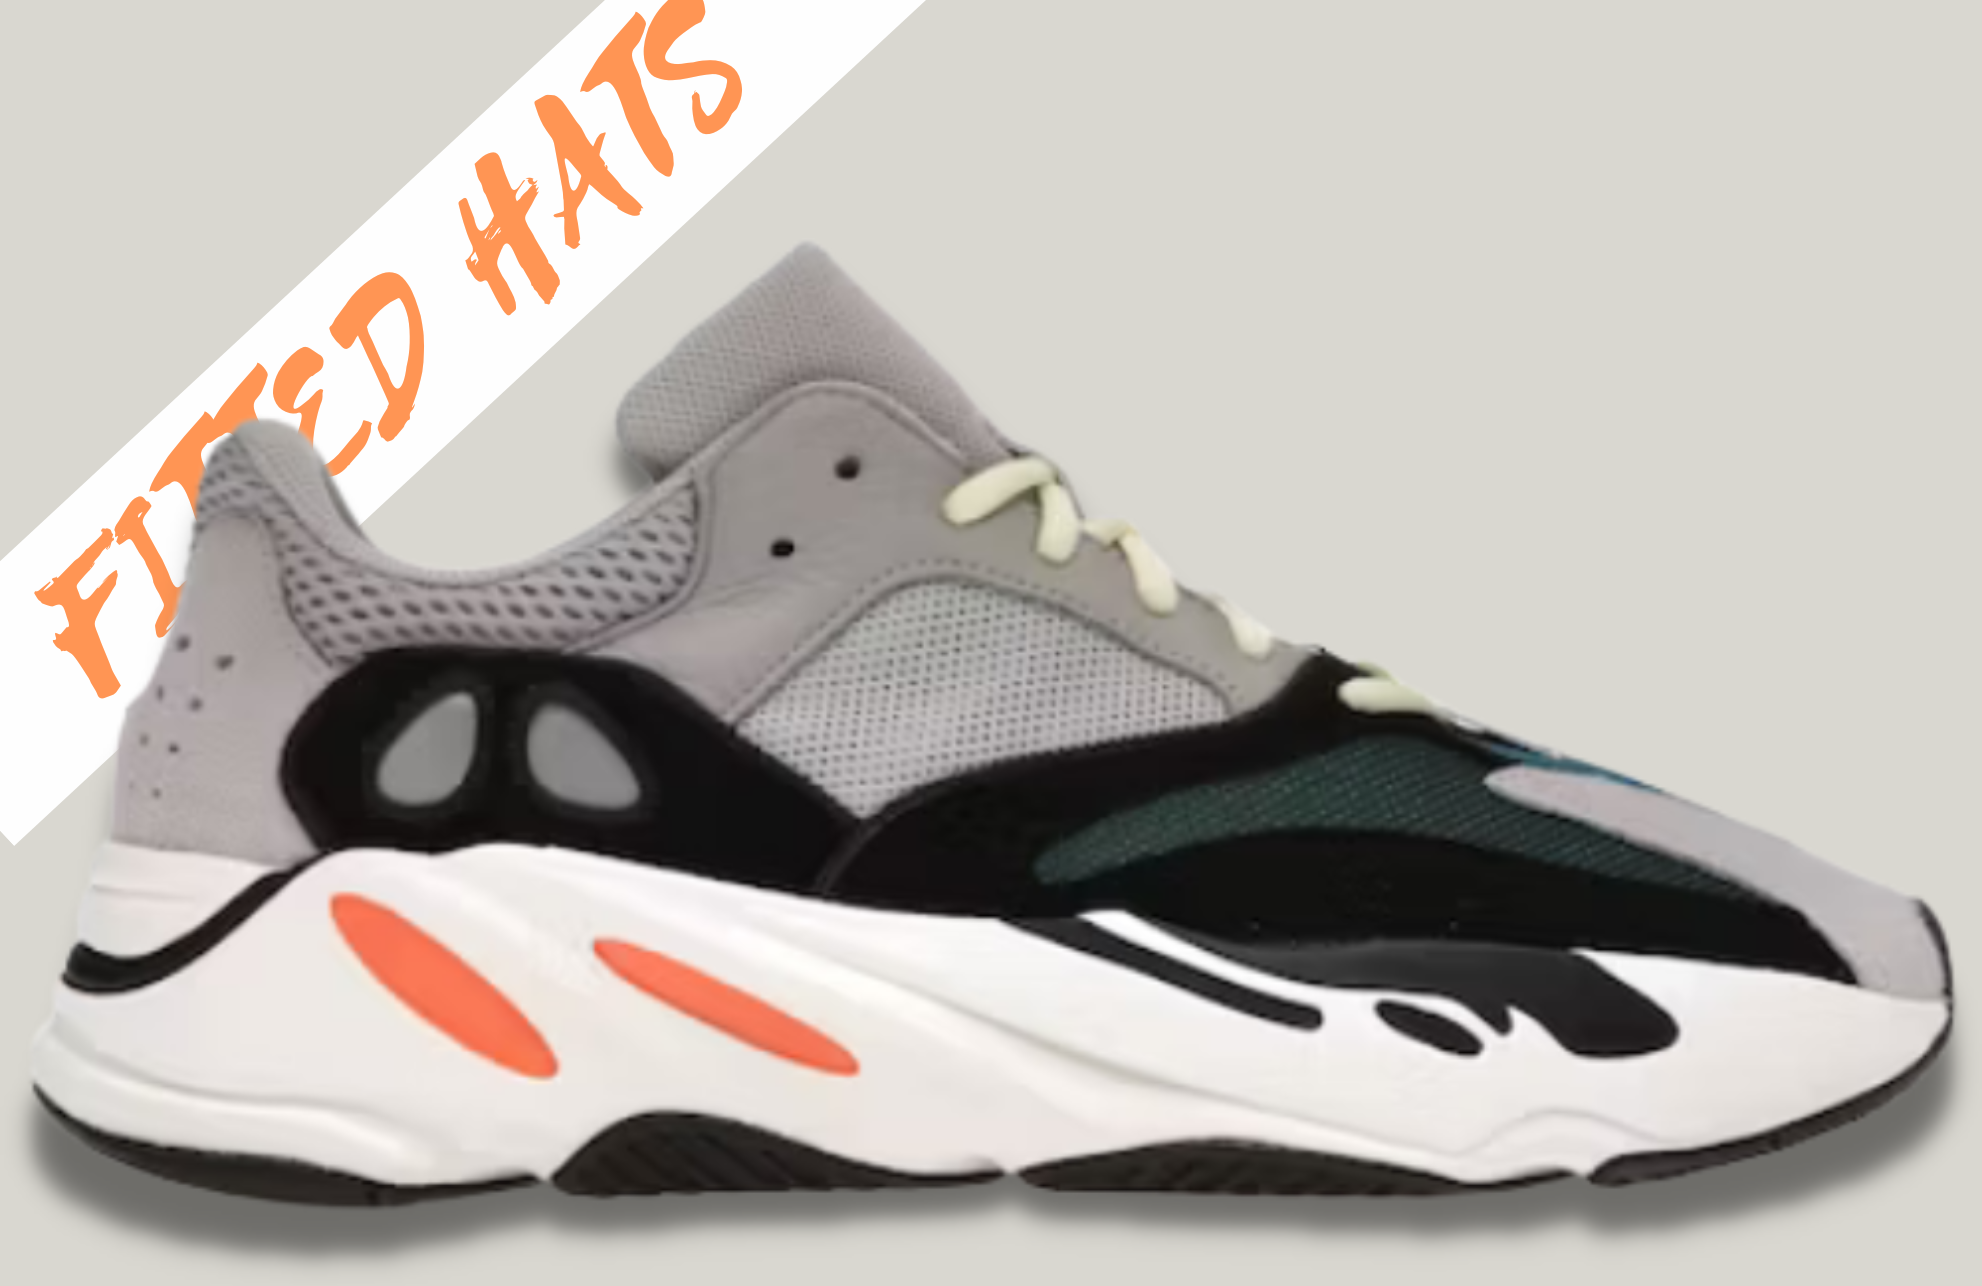 hats to match yeezy 700 wave runner